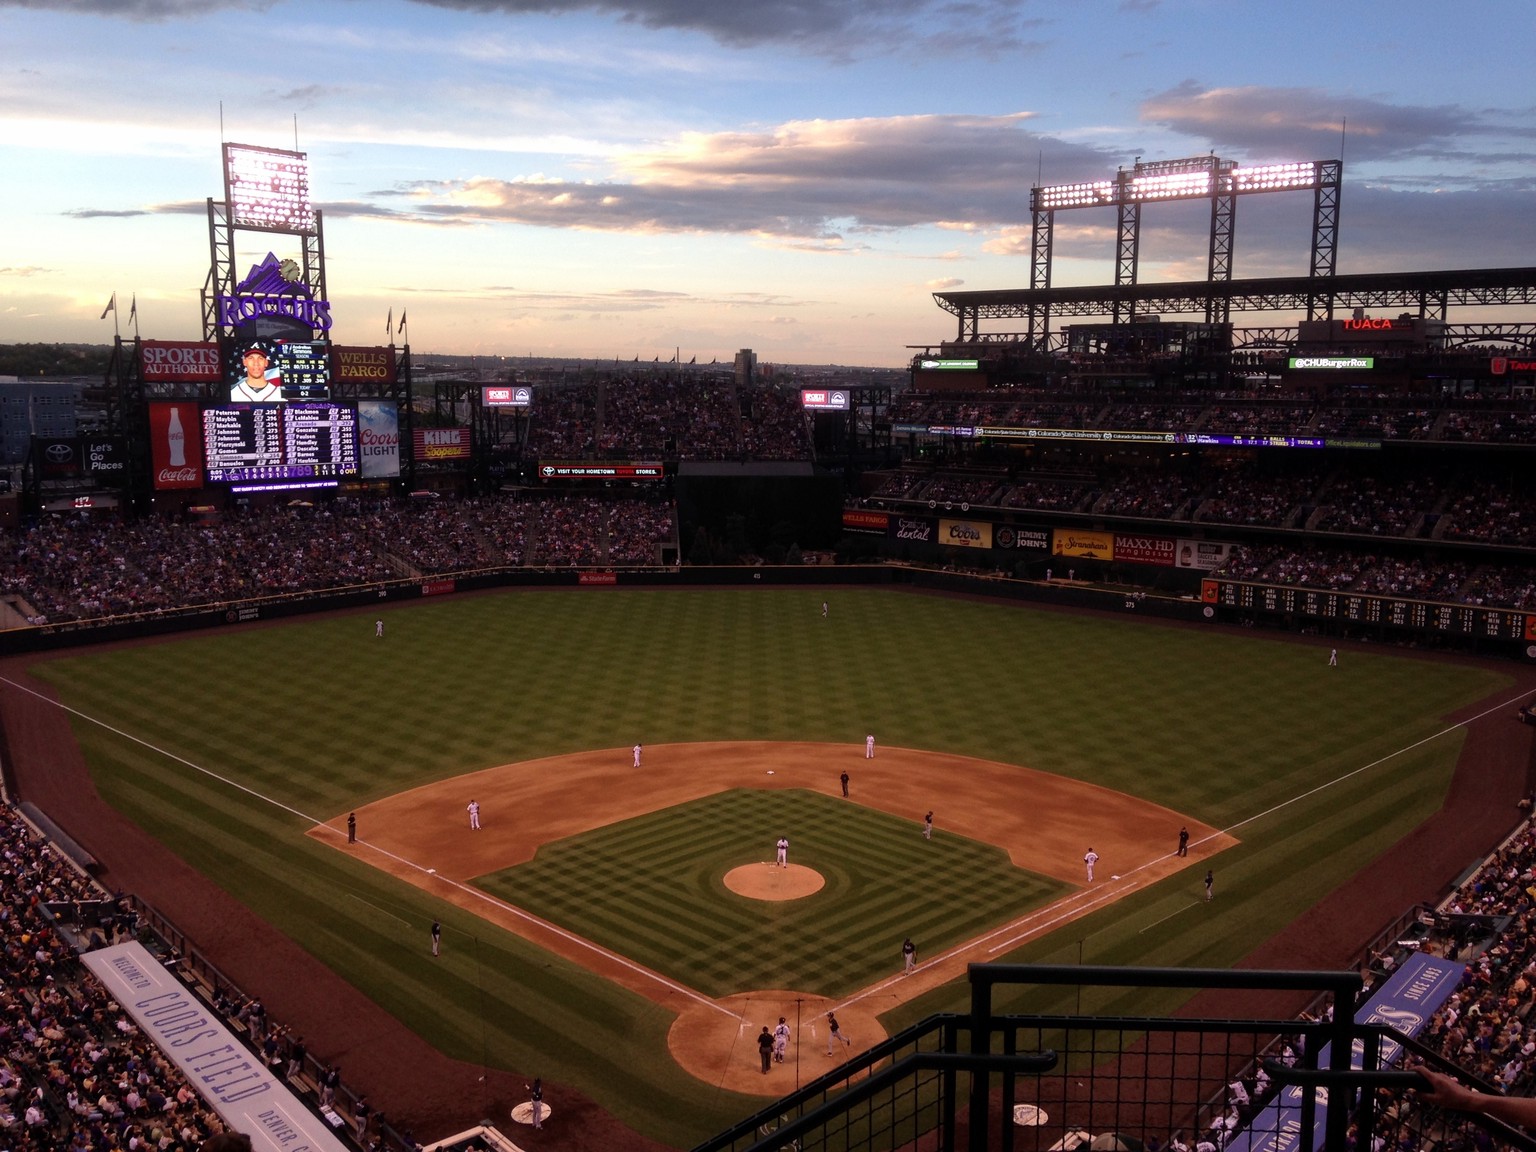 Mile high baseball: A review of Coors Field – Section 411